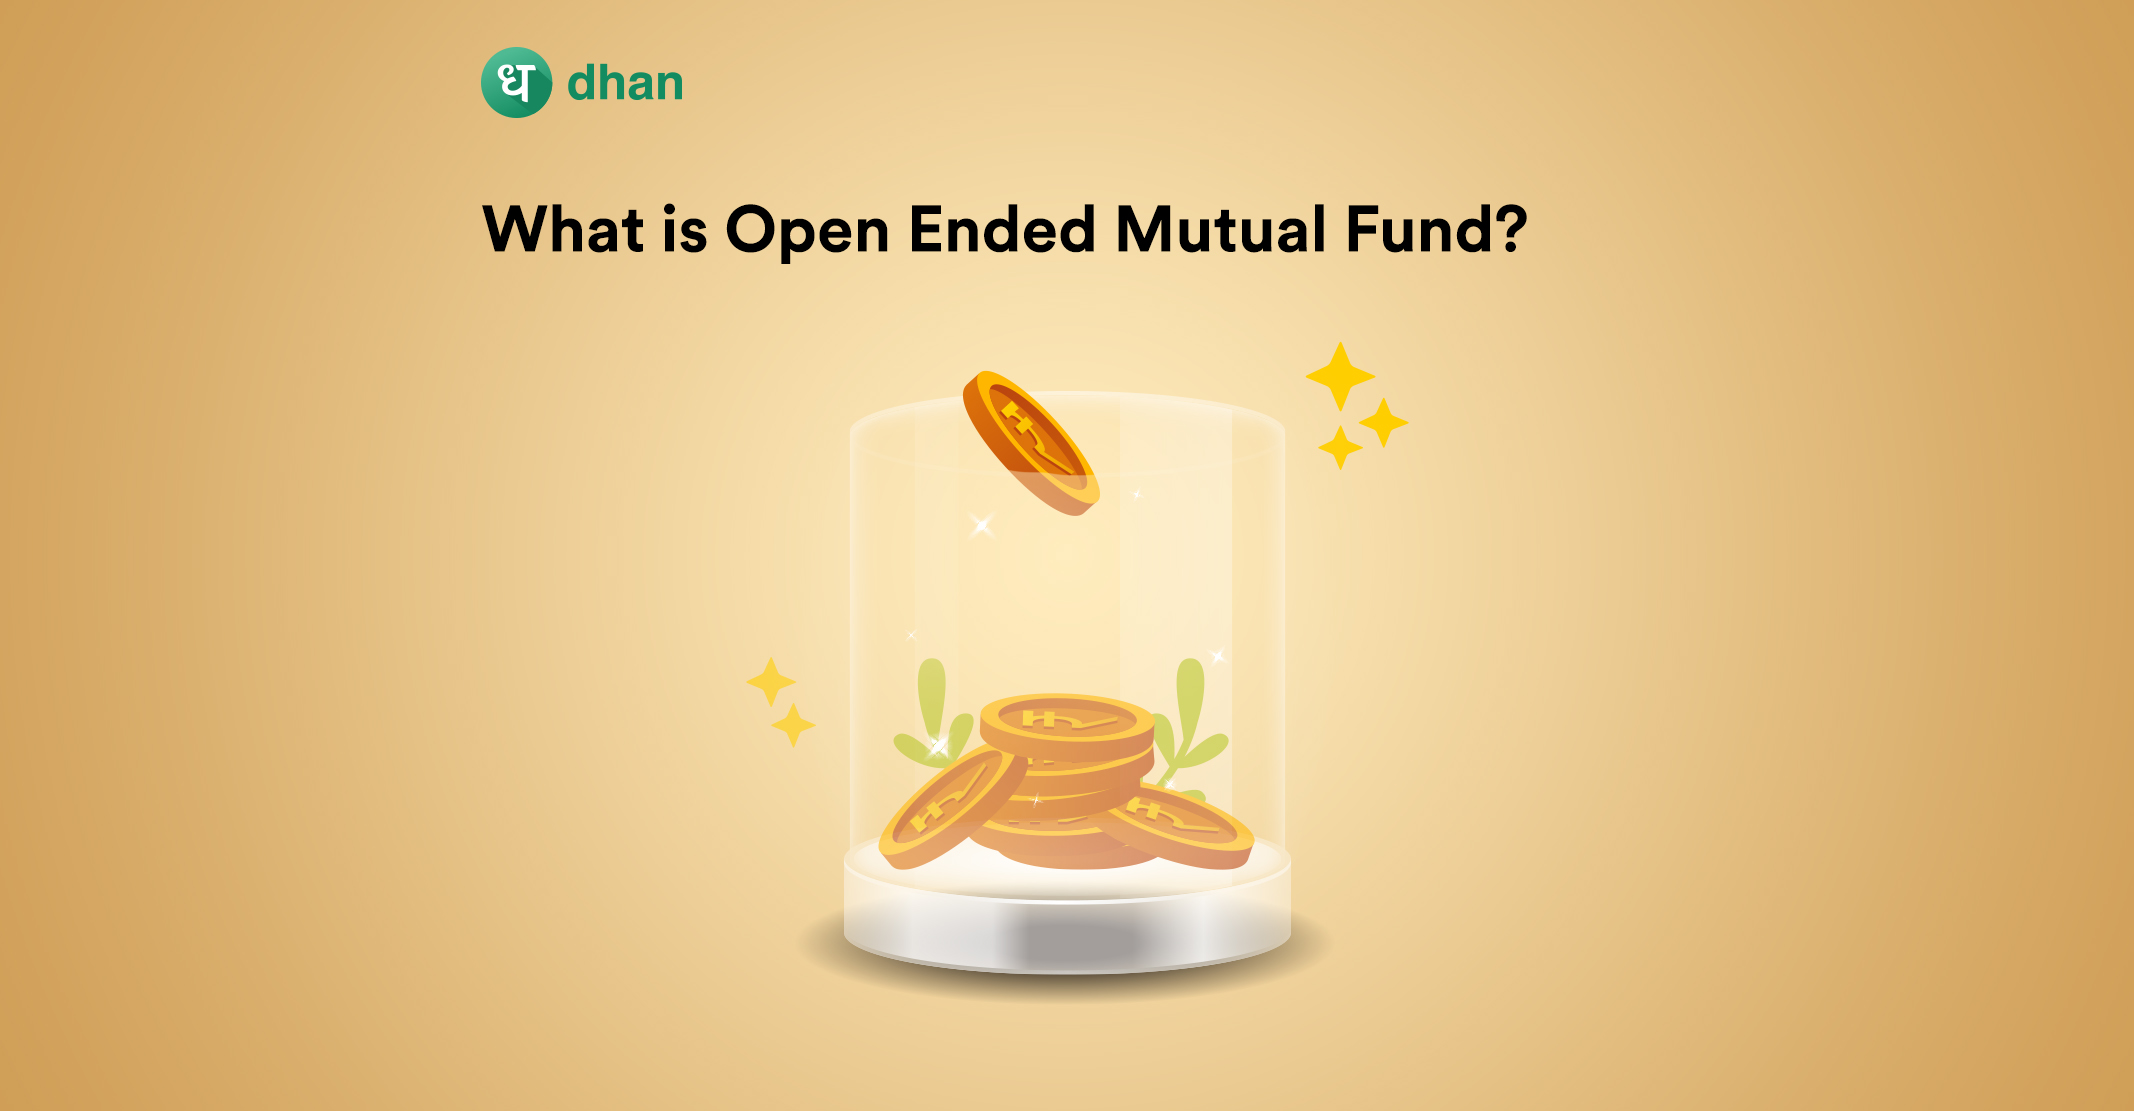 Open Ended Mutual Fund